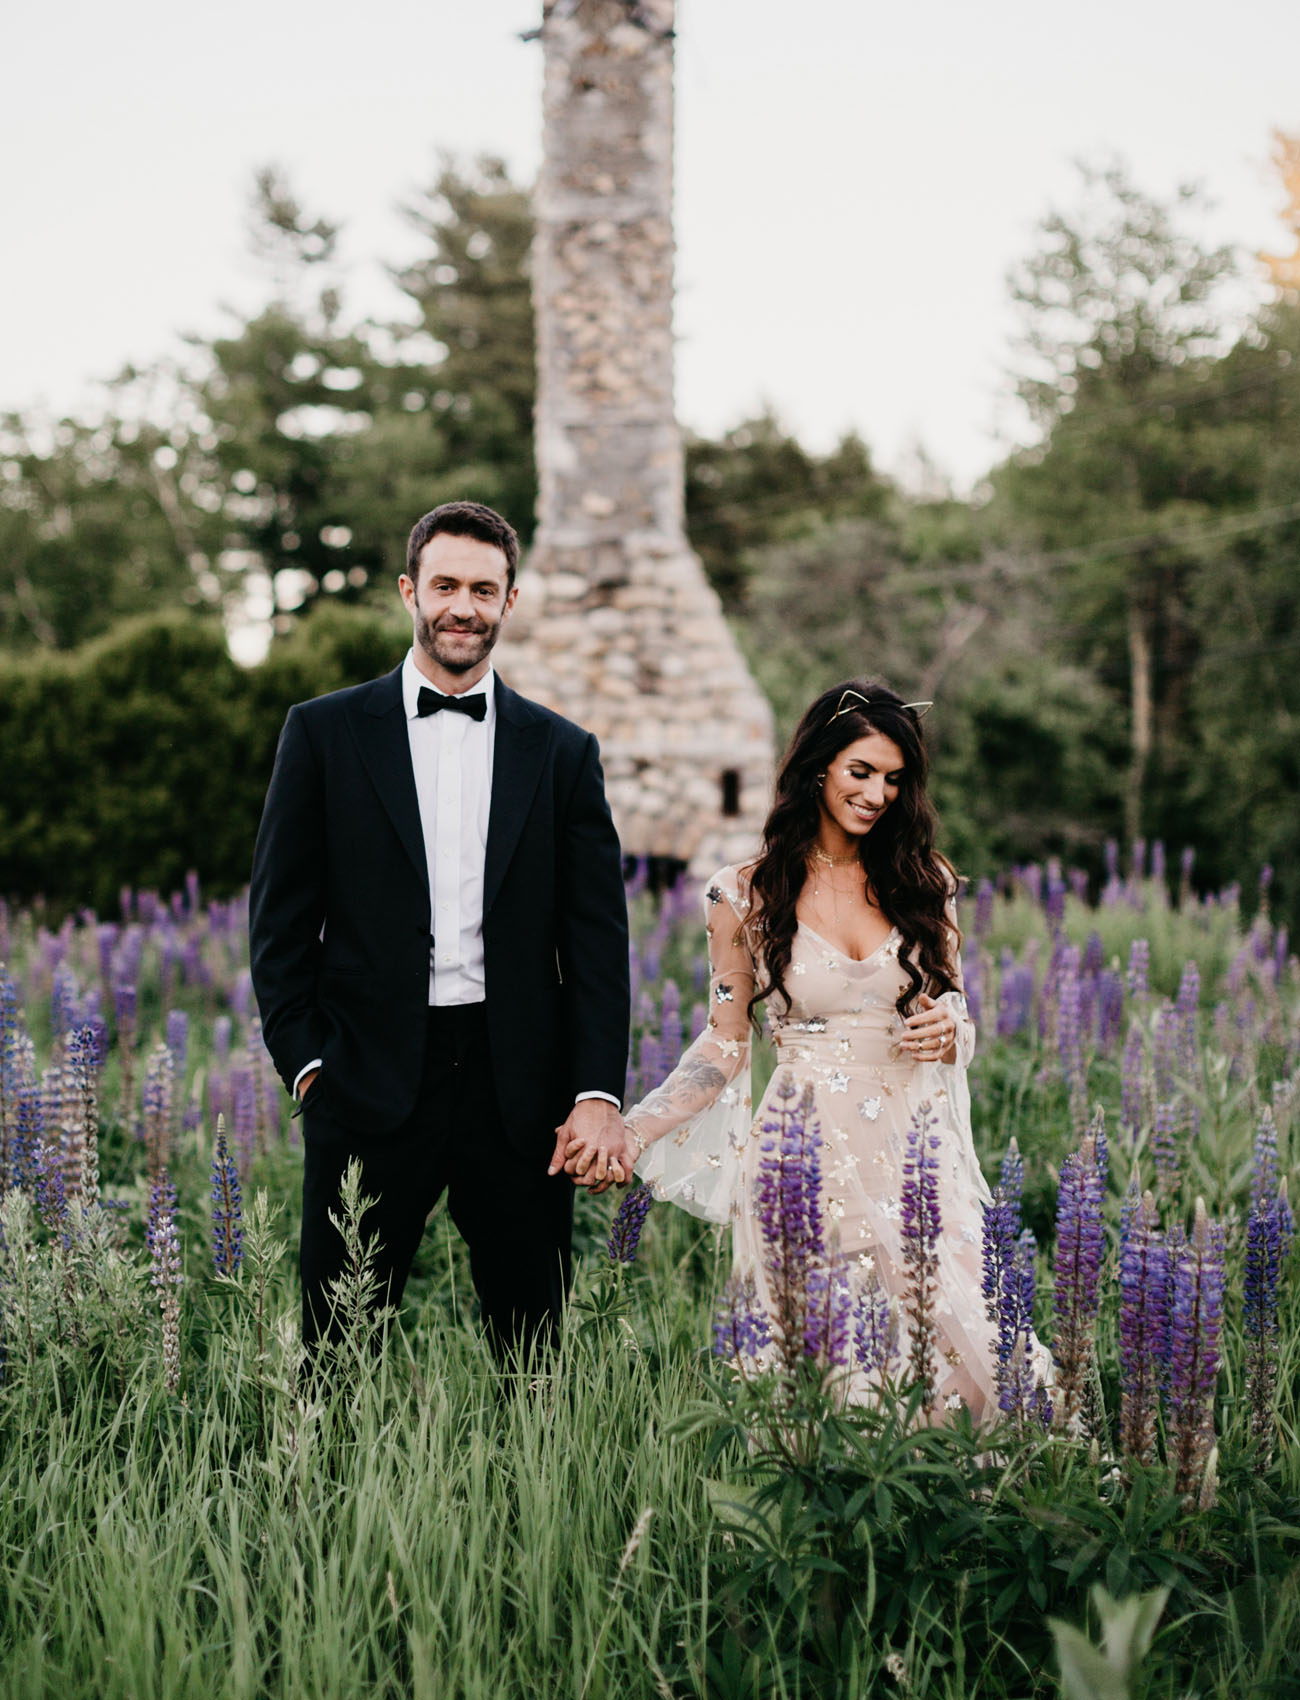 This gorgeous couple united what they love   stars and cats   for a unique wedding theme and rocked it